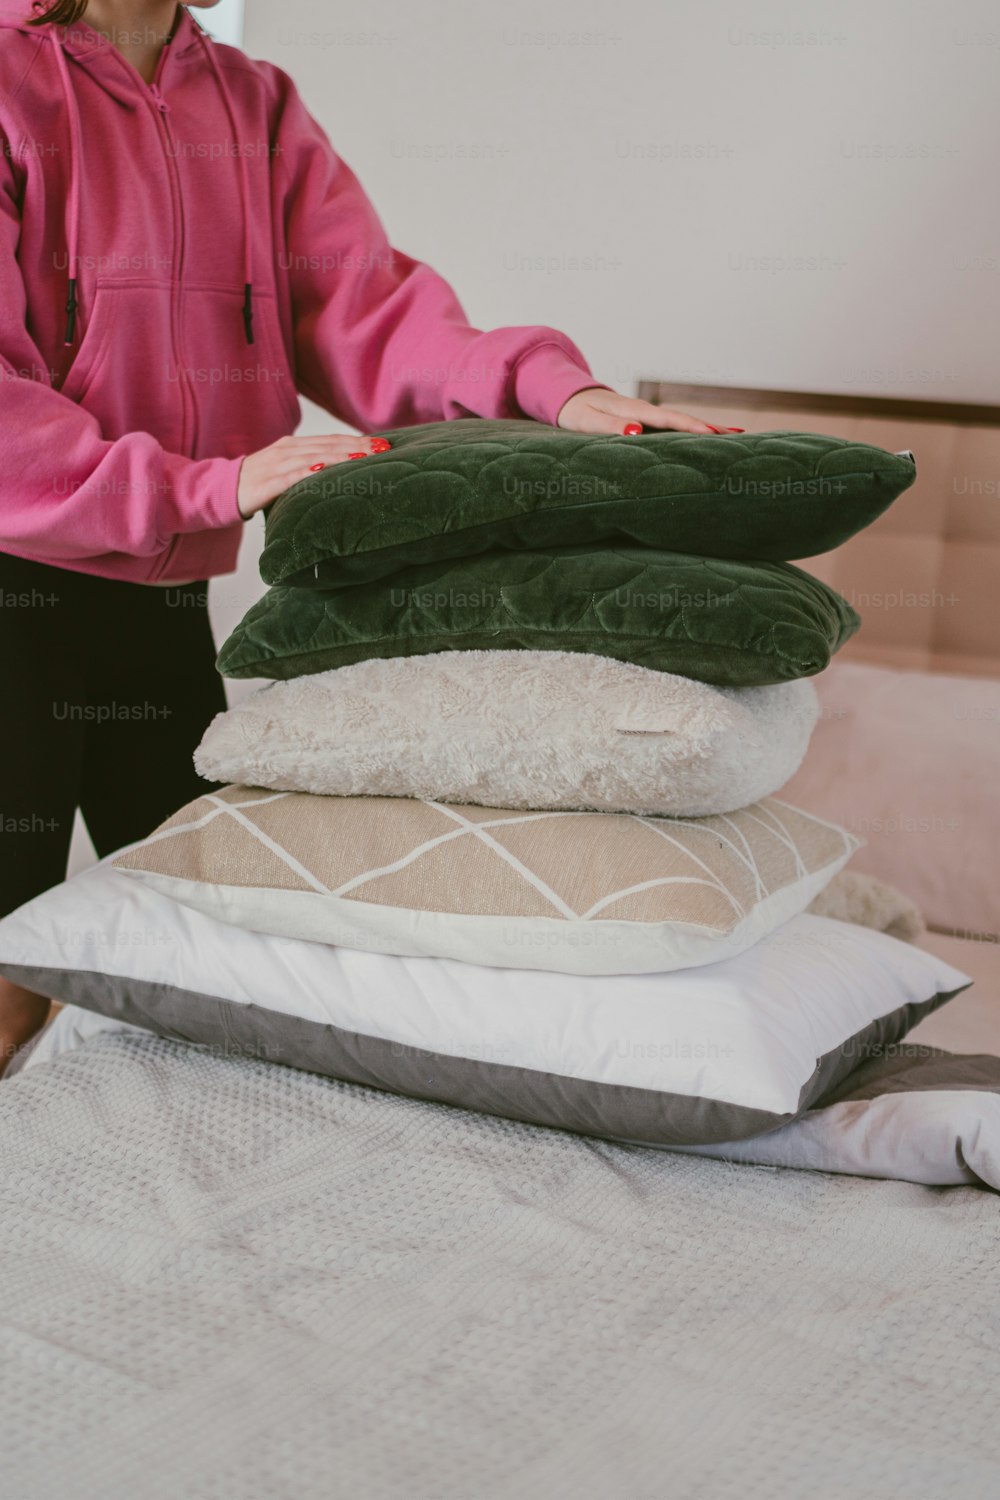 a woman standing next to a pile of pillows